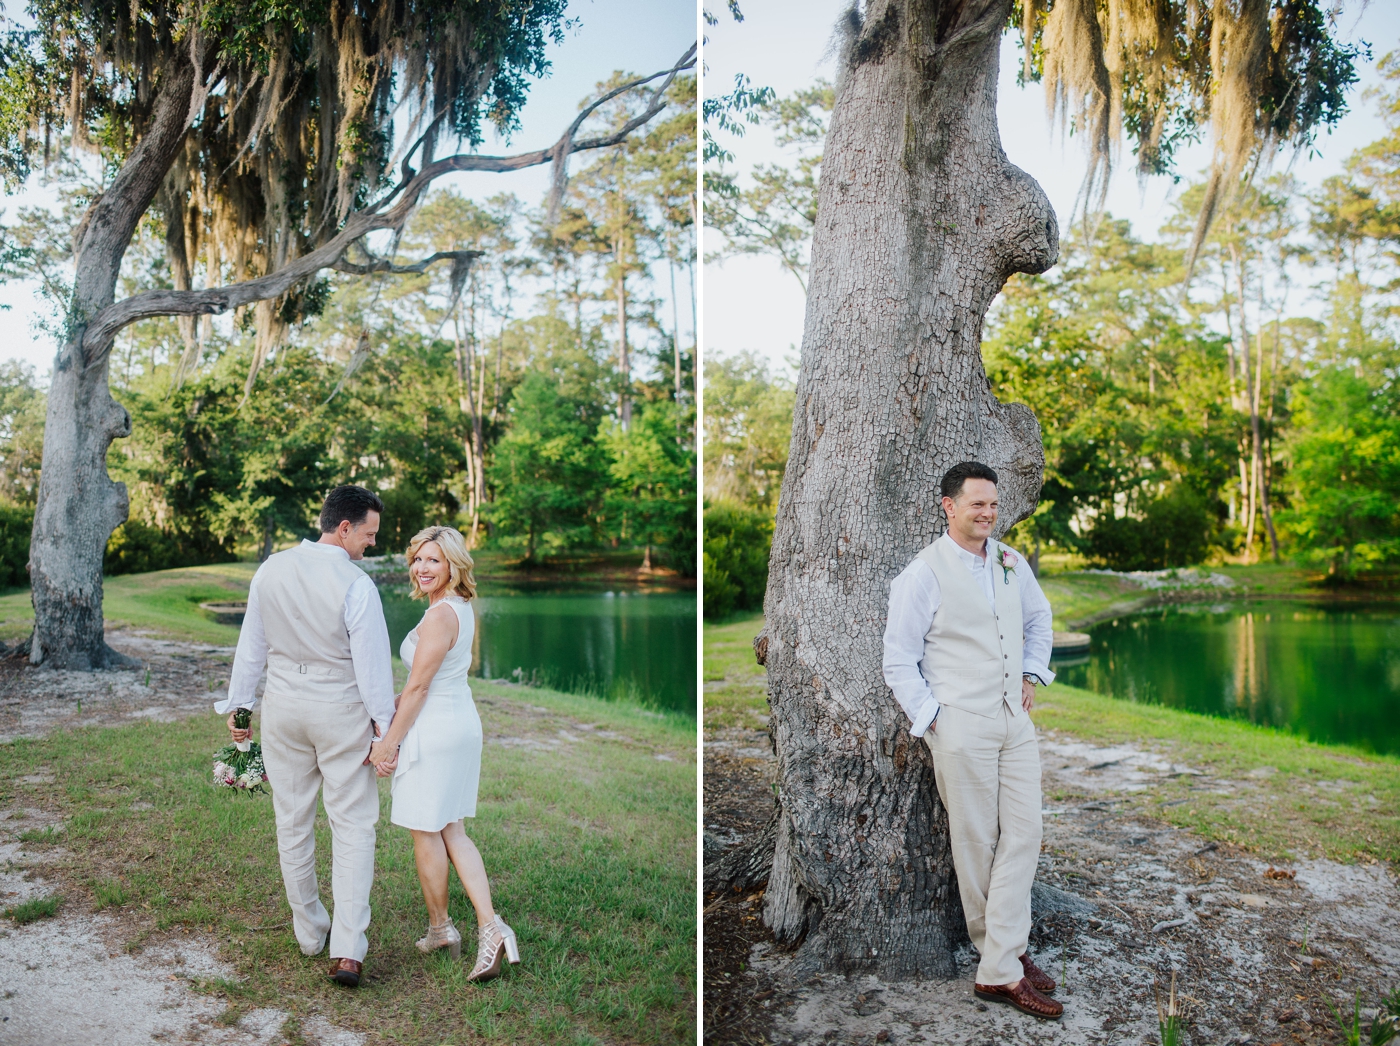 Michelle & David’s Sweet Elopement at The Landings | Izzy and Co.